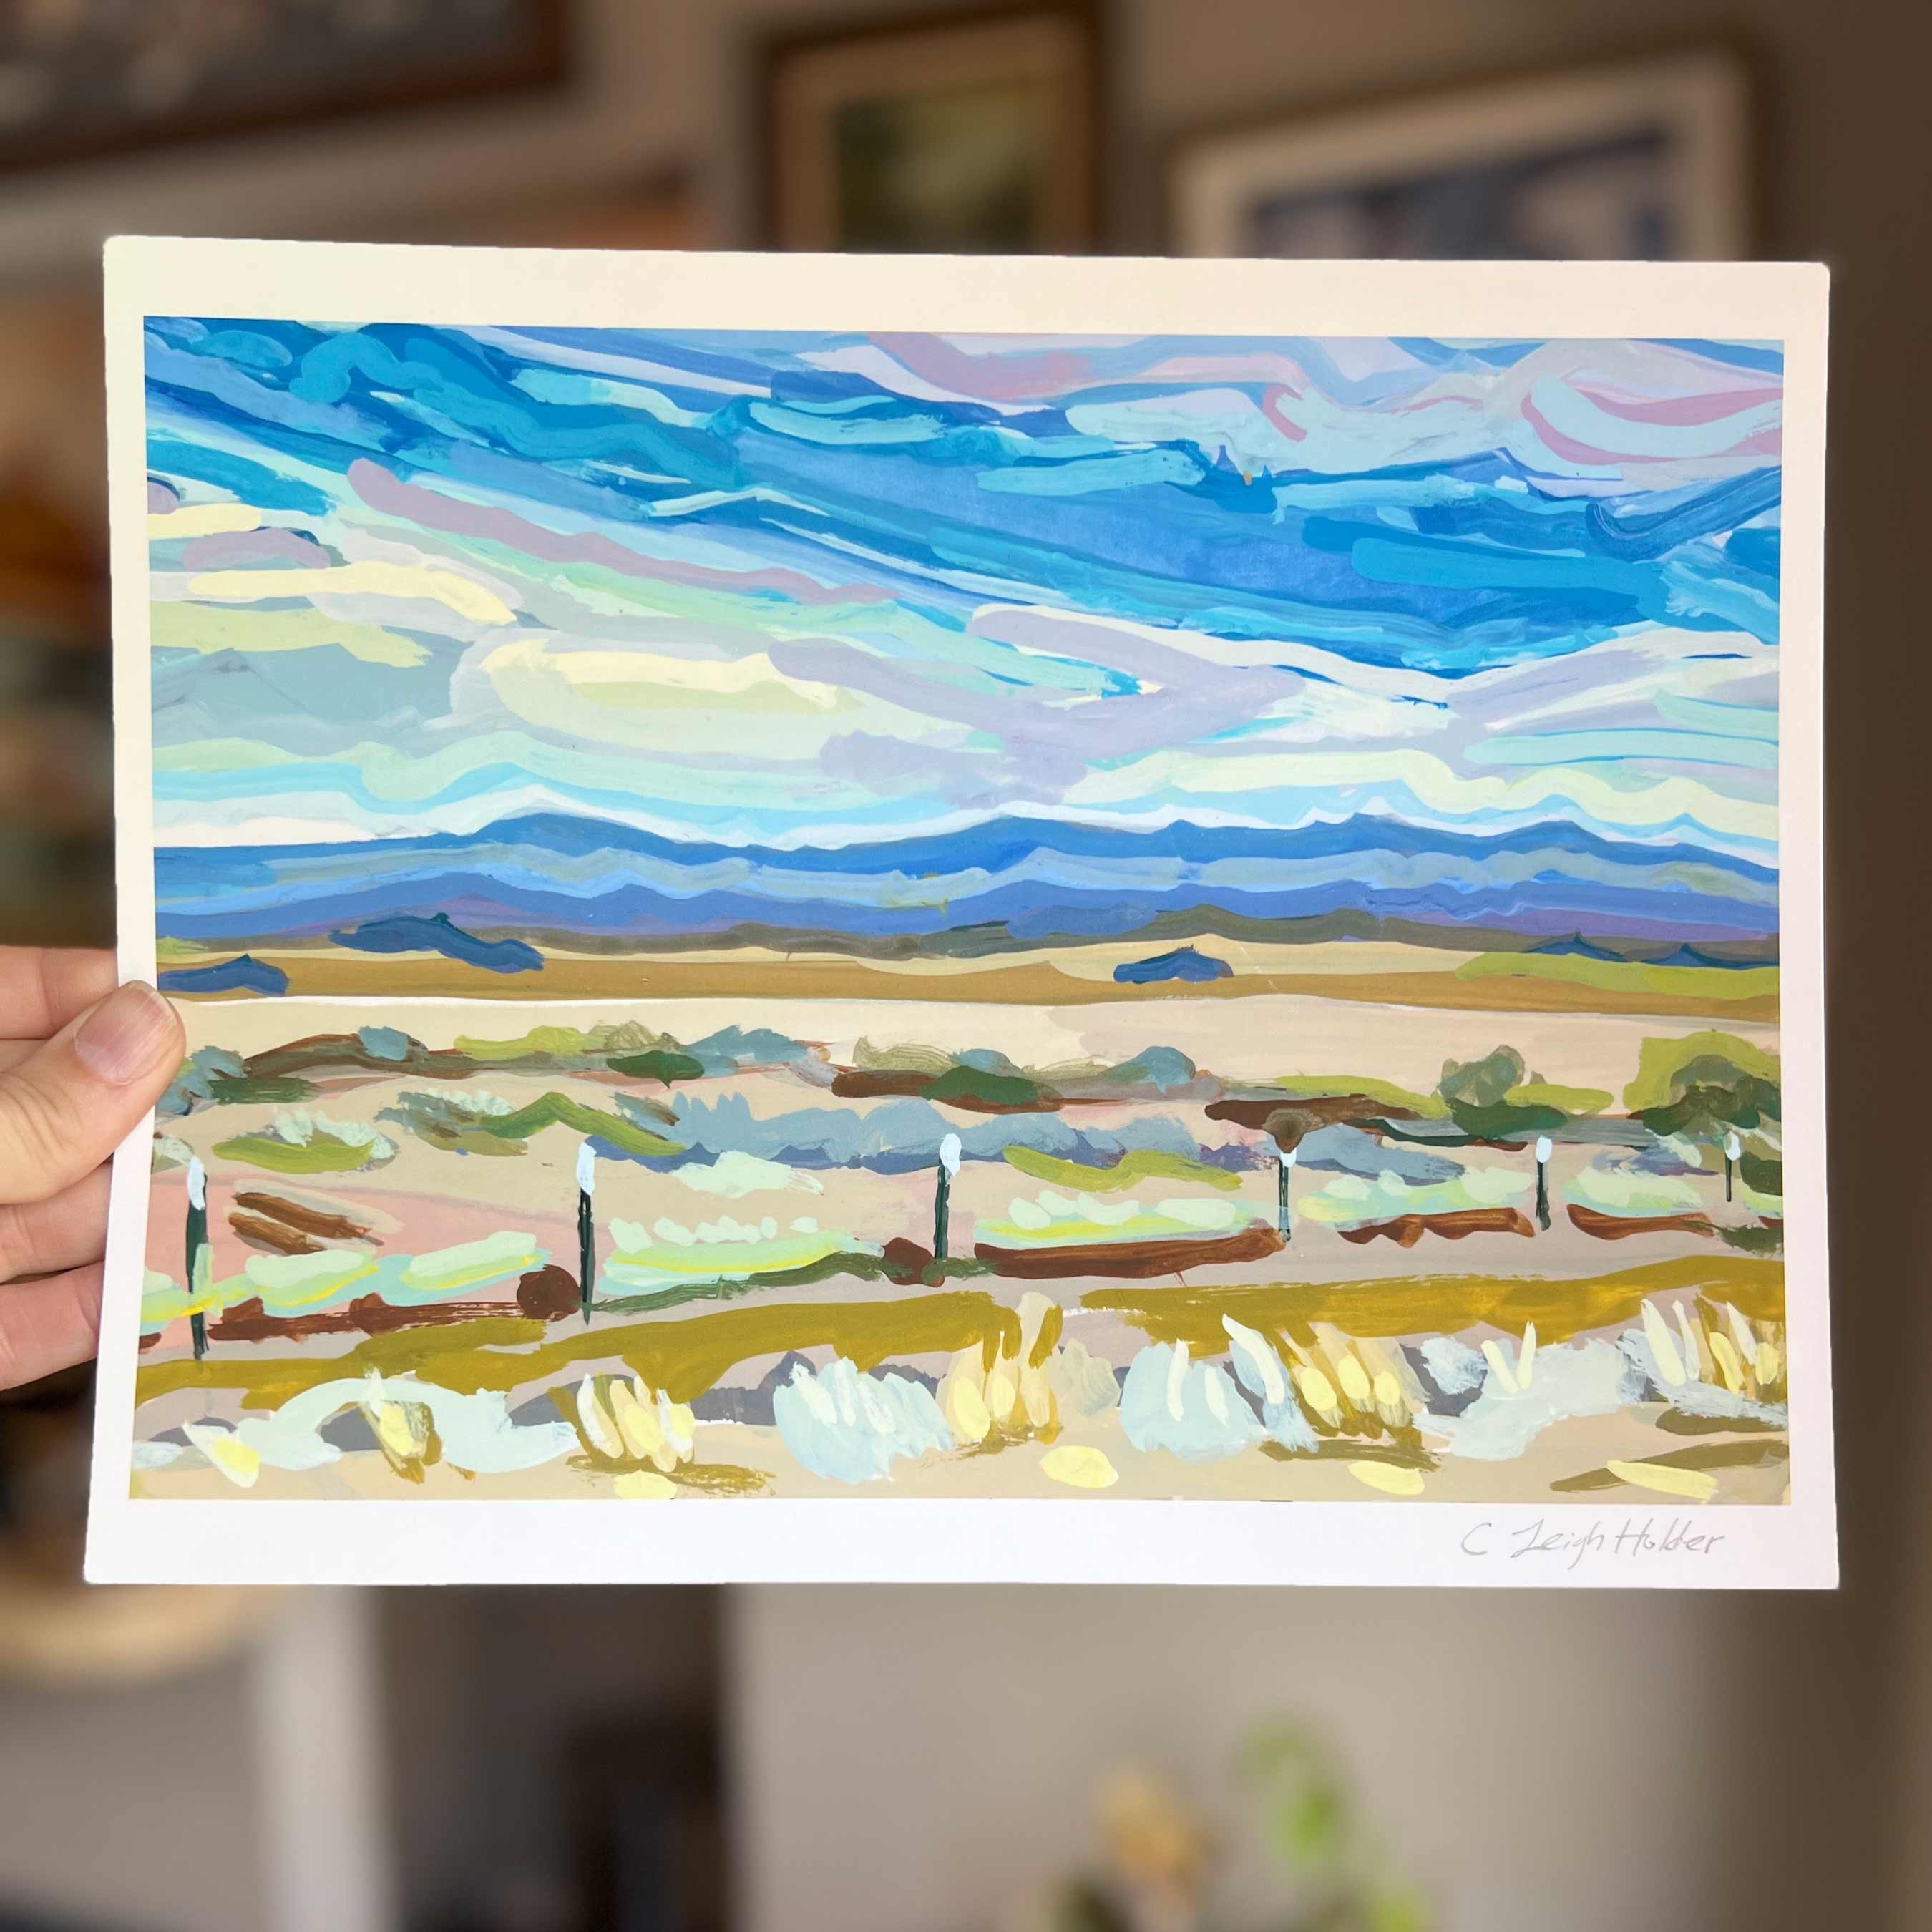 Far West Texas Landscape Art Print, Archival Print of Original Gouache Painting of Wide Open Spaces in Marfa, Texas, 11 x 8.5